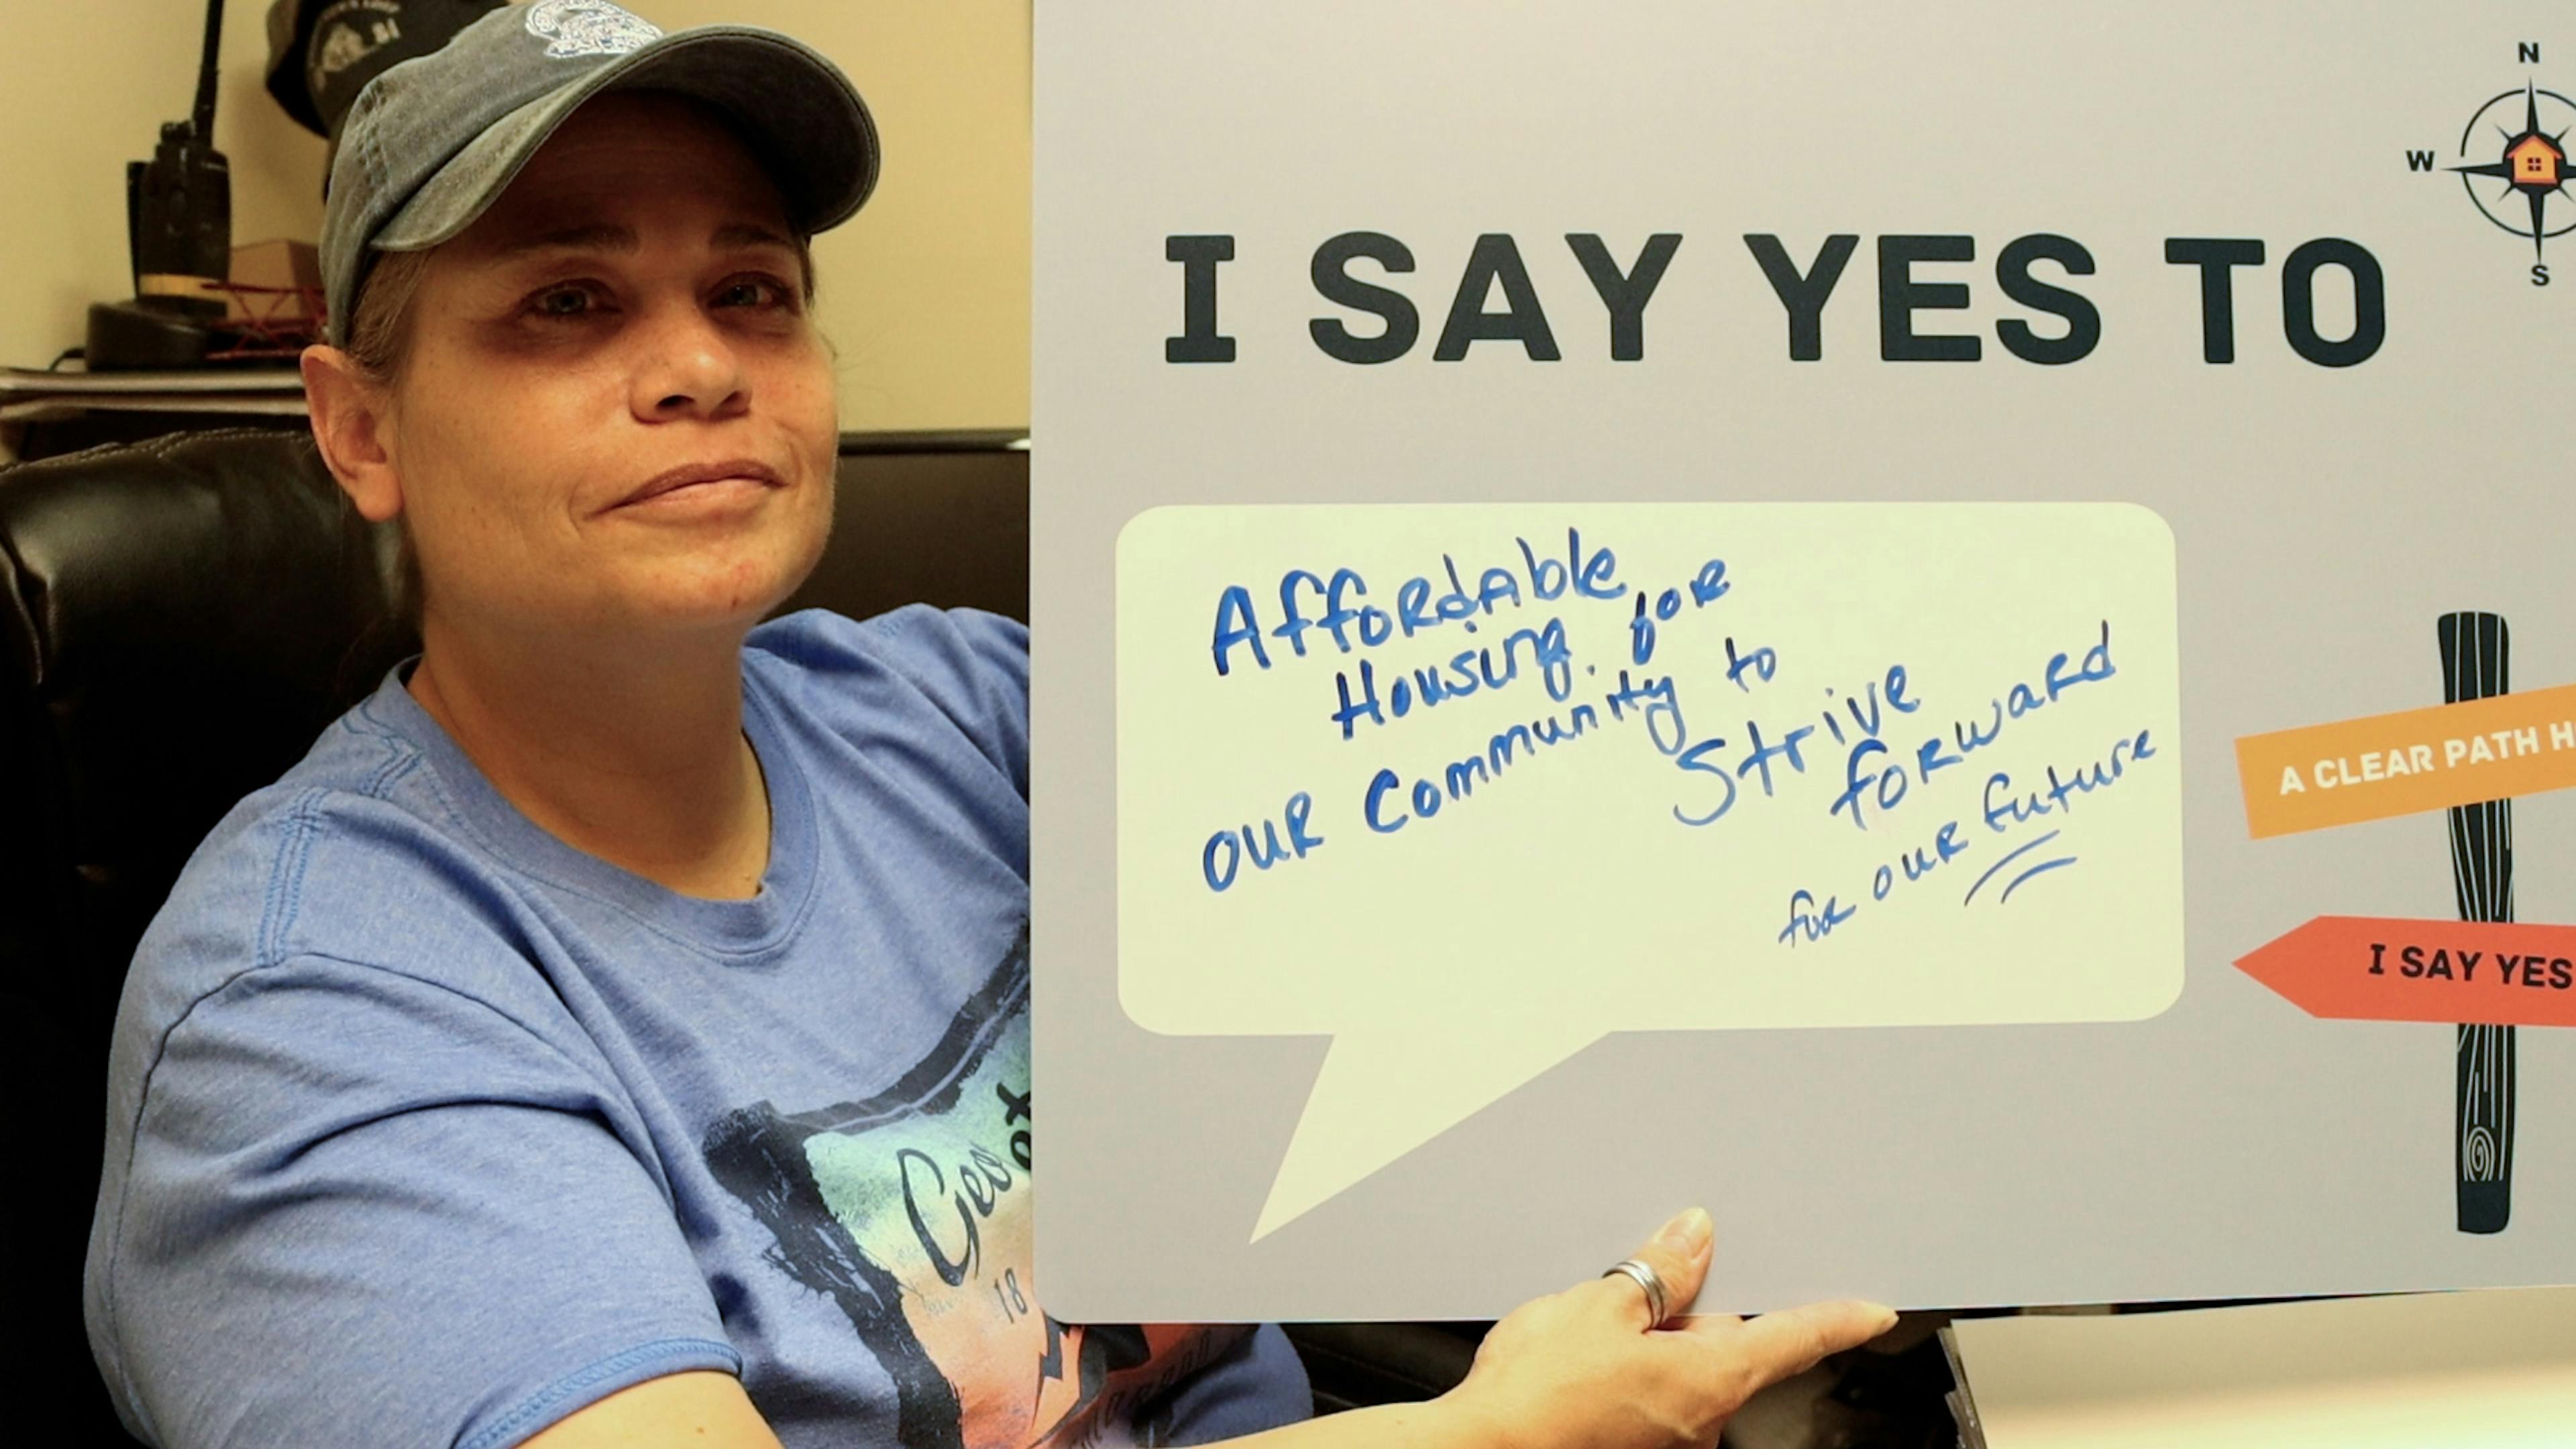 I Say Yes To... Affordable Housing for our Community to Strive Forward for our Future